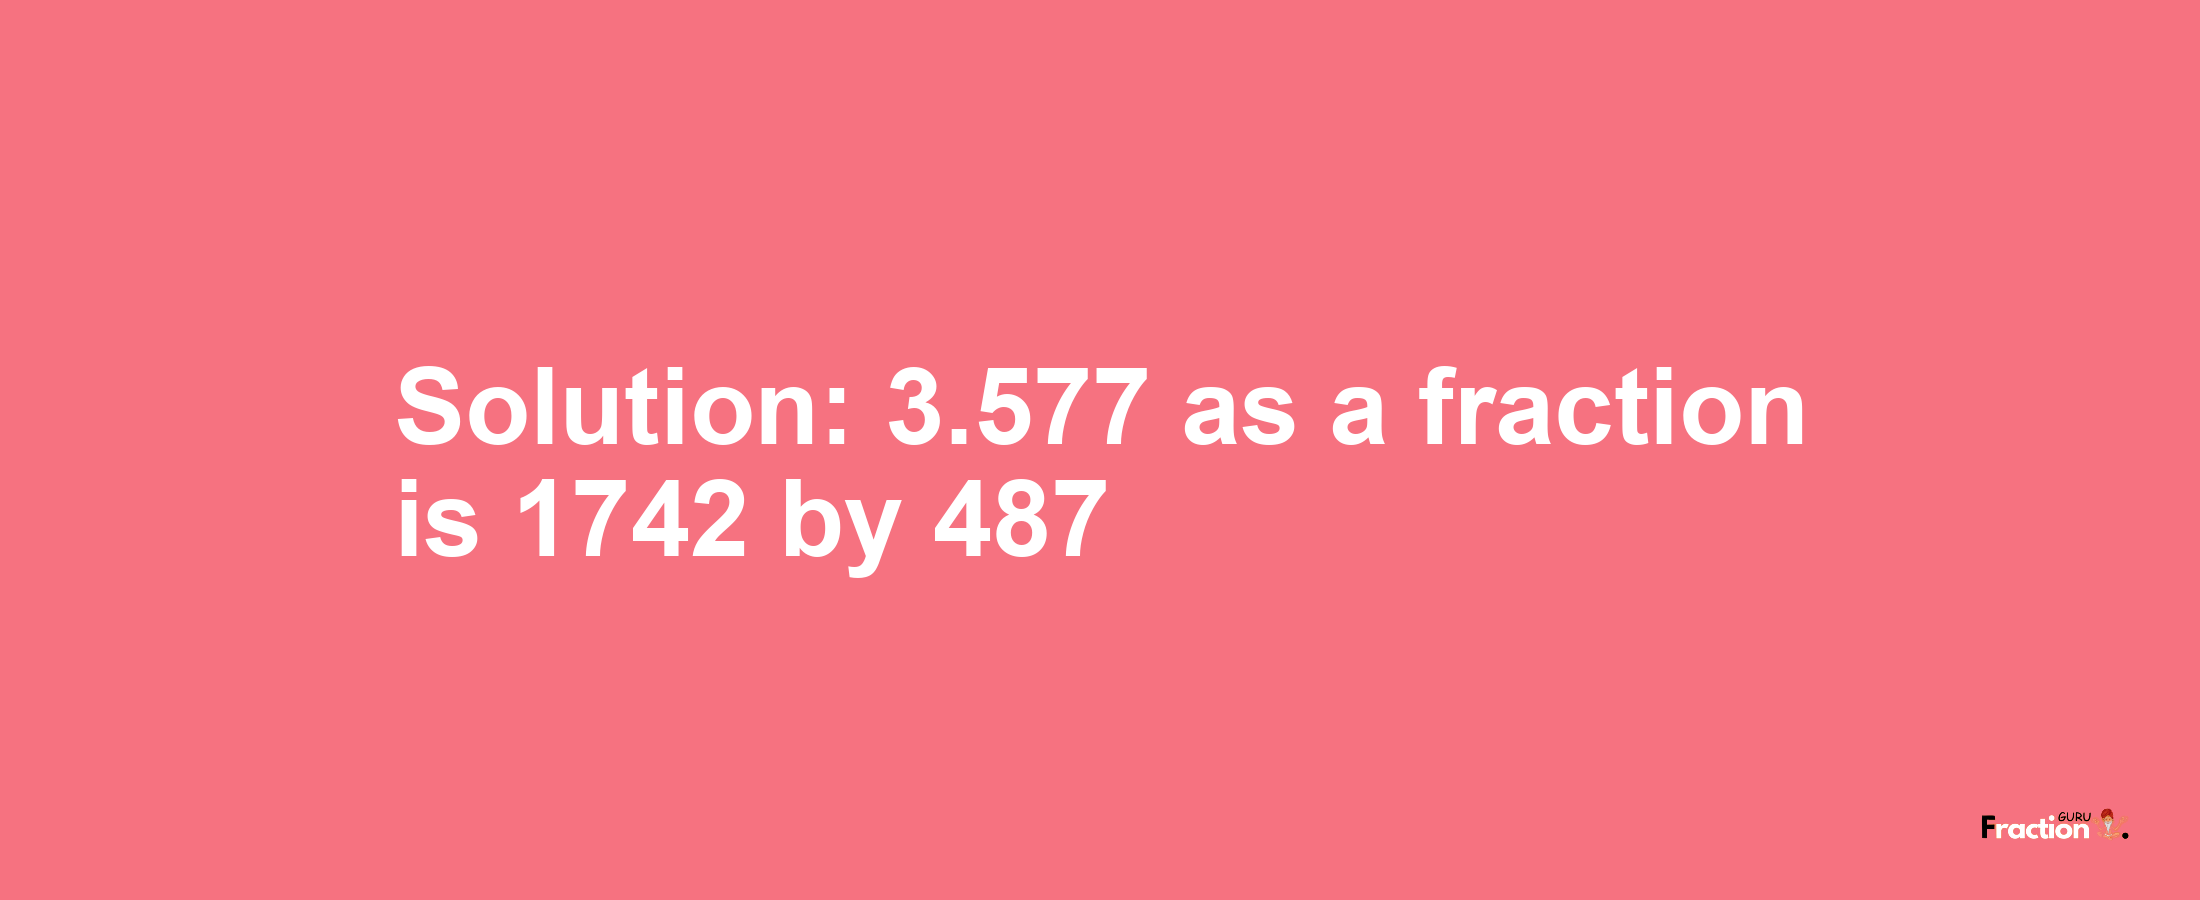 Solution:3.577 as a fraction is 1742/487